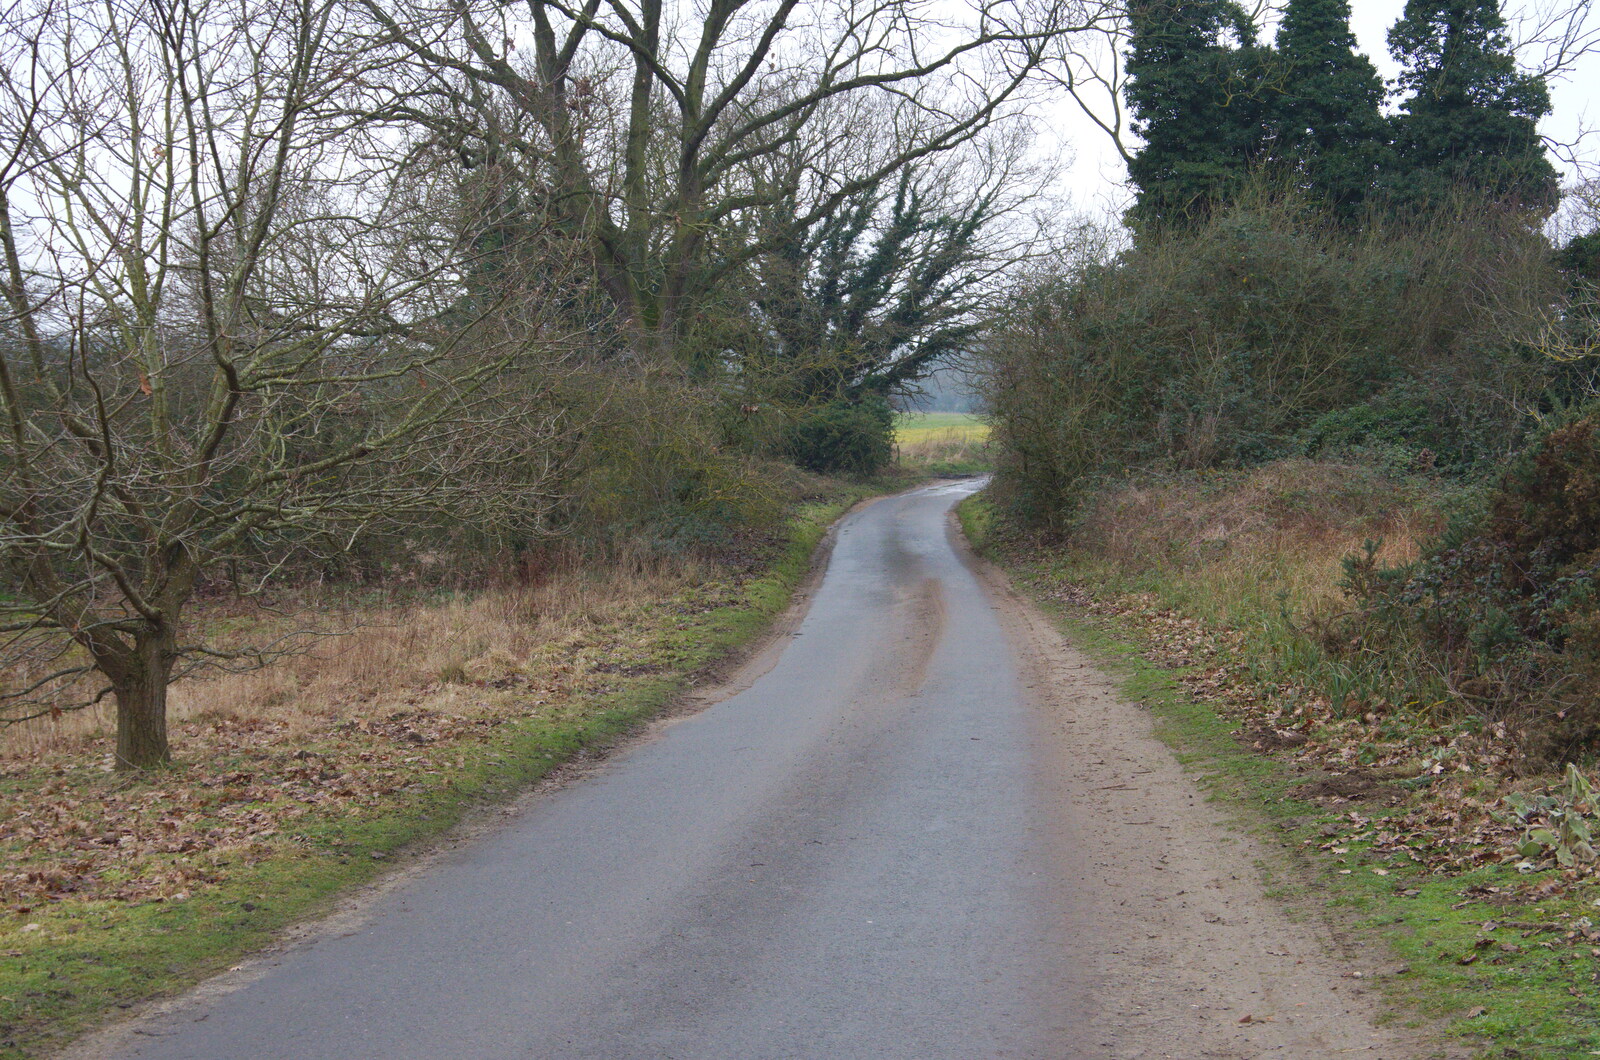 The road to Redgrave from New Year's Day on the Ling, Wortham, Suffolk - 1st January 2020